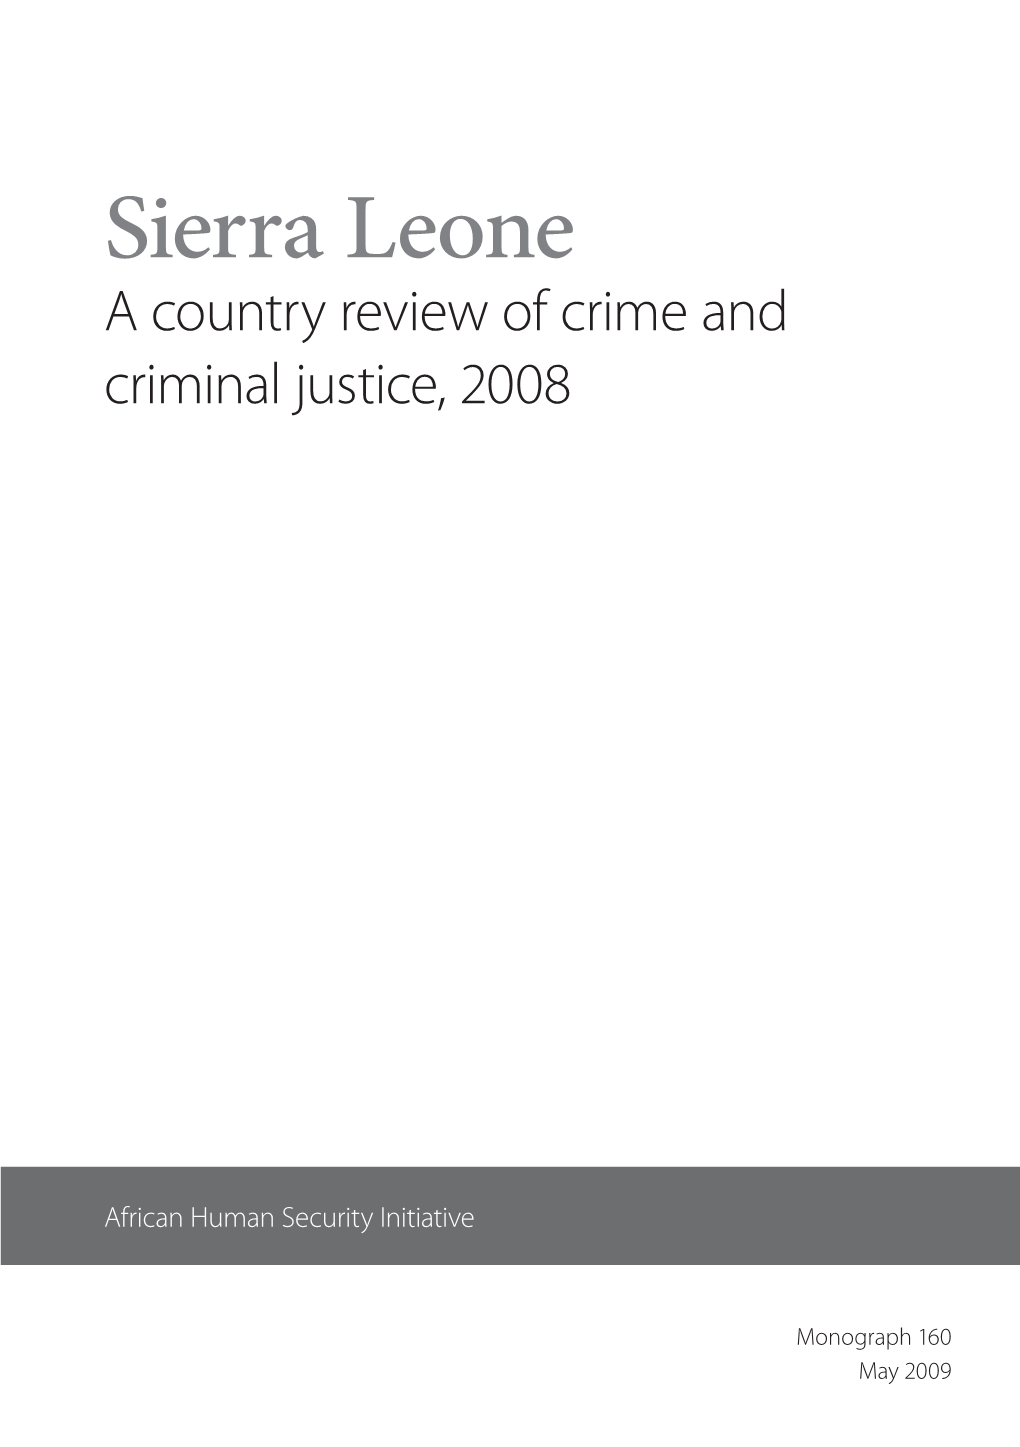 Sierra Leone: a Country Review of Crime and Criminal Justice, 2008